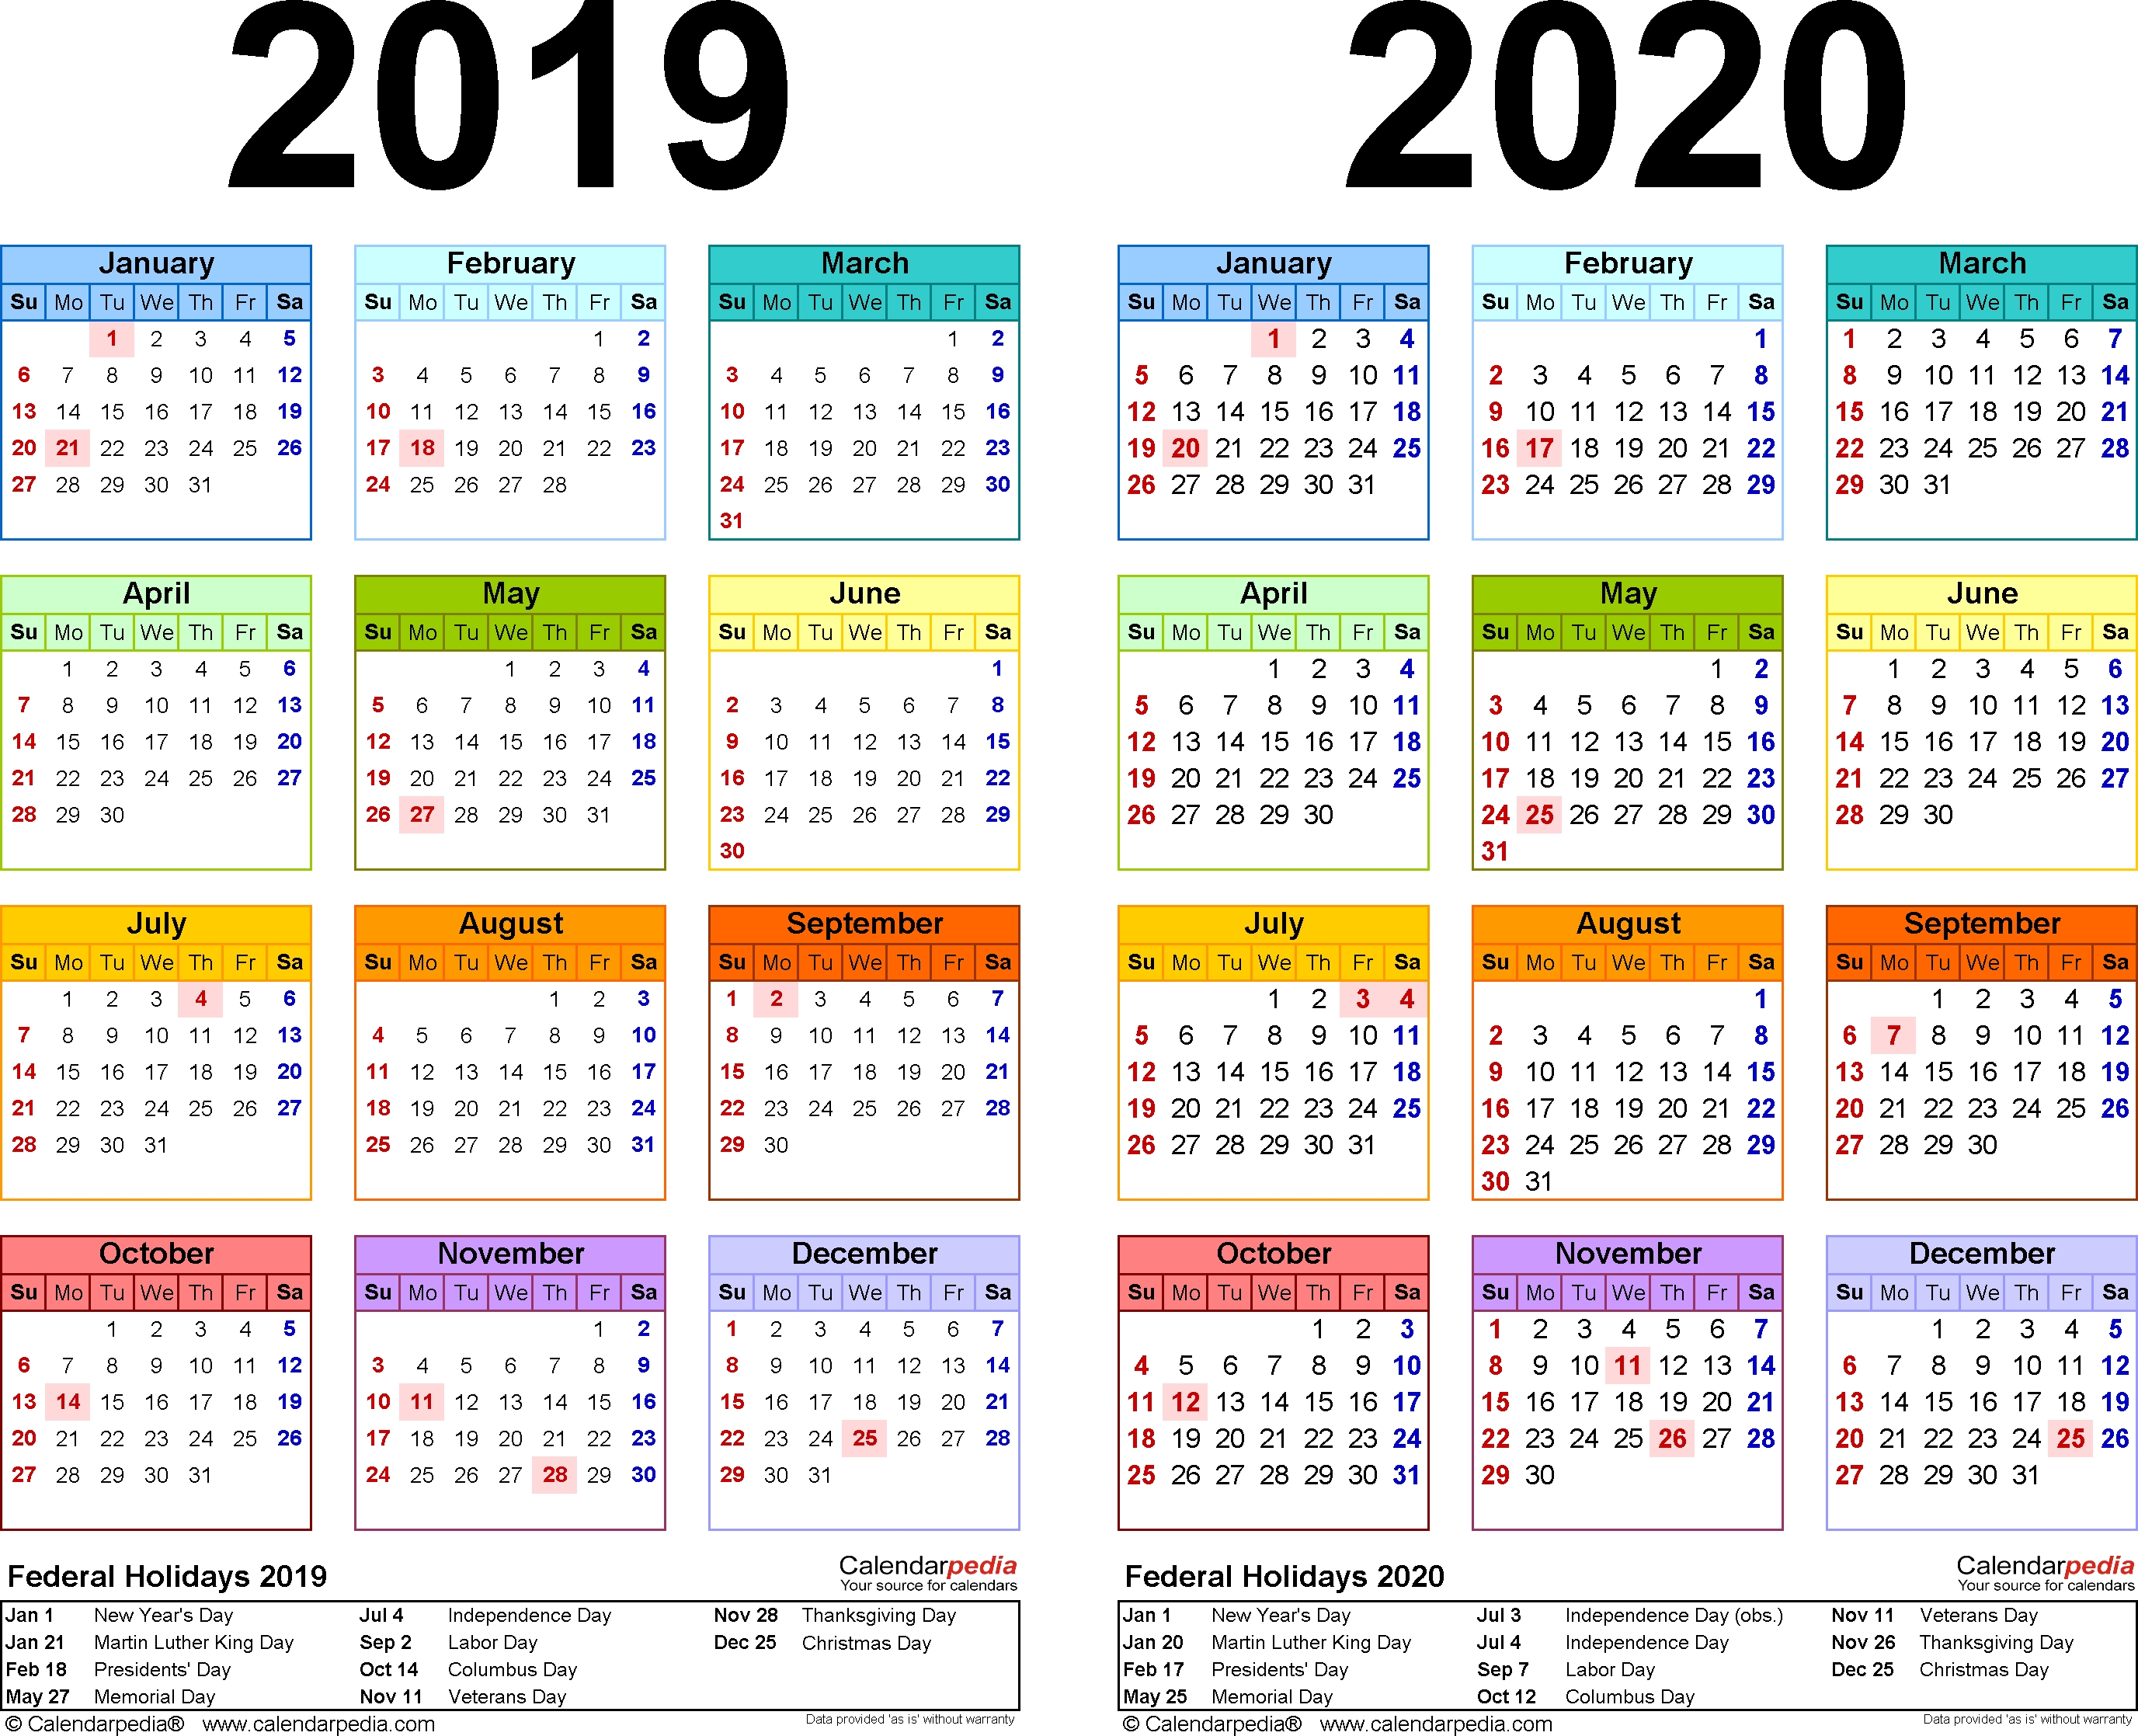 2019-2020 Calendar - Free Printable Two-Year Word Calendars for 2019/2020 Calander To Write On